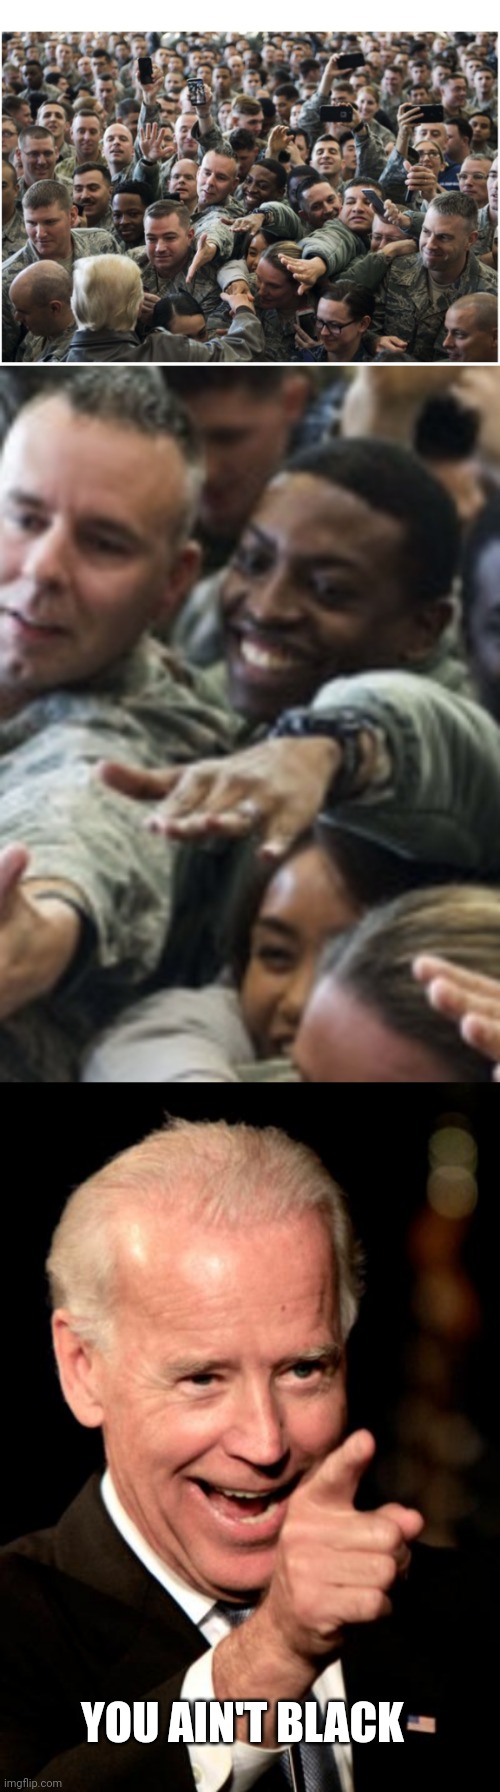 The military always cheered Trump because he had their back. They can't stand traitor Biden. | YOU AIN'T BLACK | image tagged in military loves trump,memes,smilin biden | made w/ Imgflip meme maker